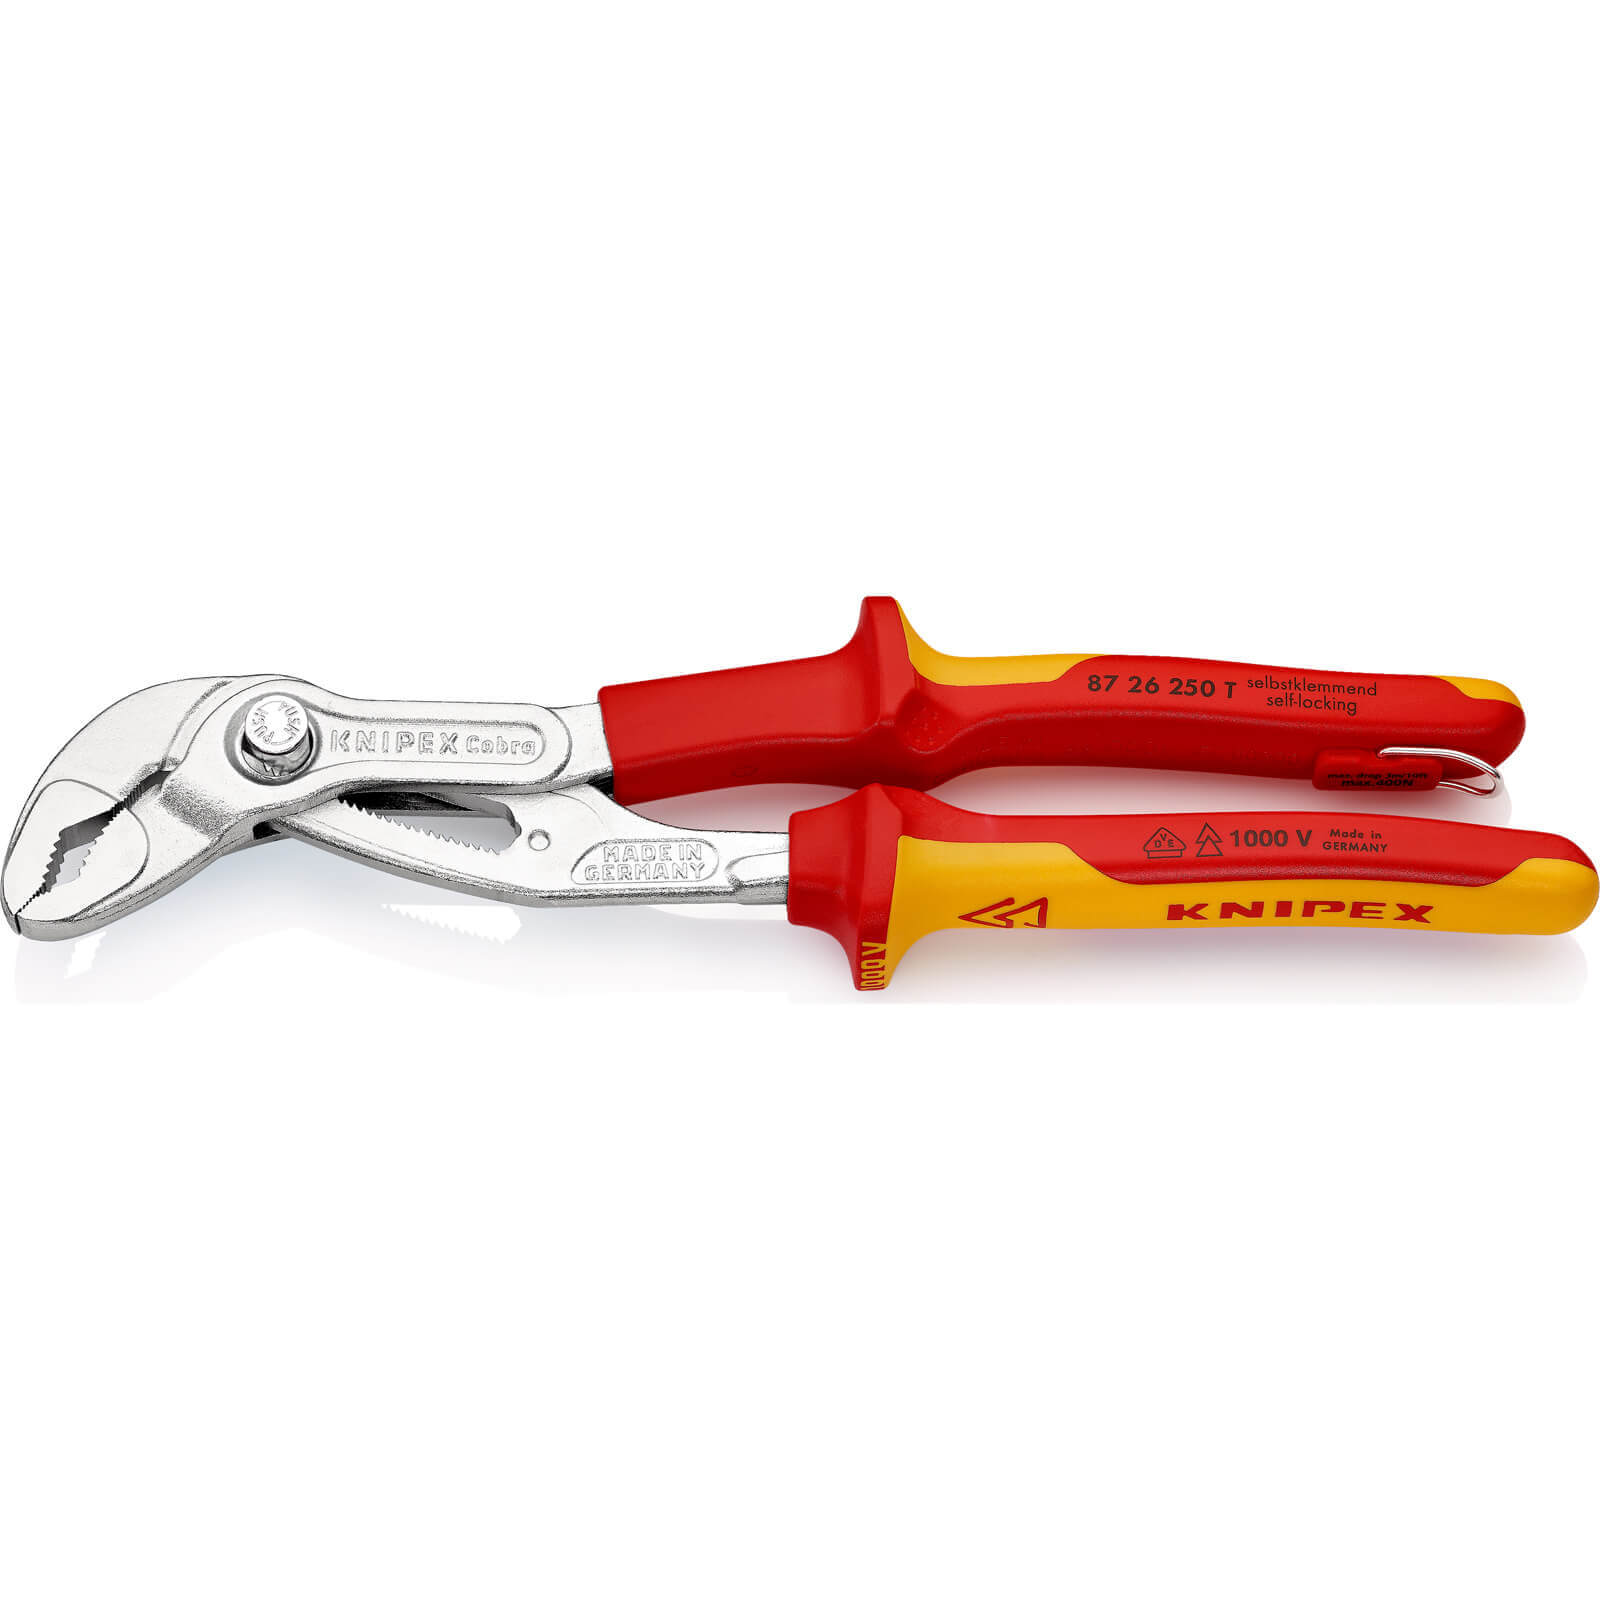 Photo of Knipex 87 26 Vde Insulated Cobra Hightech Tethered Water Pump Pliers 250mm